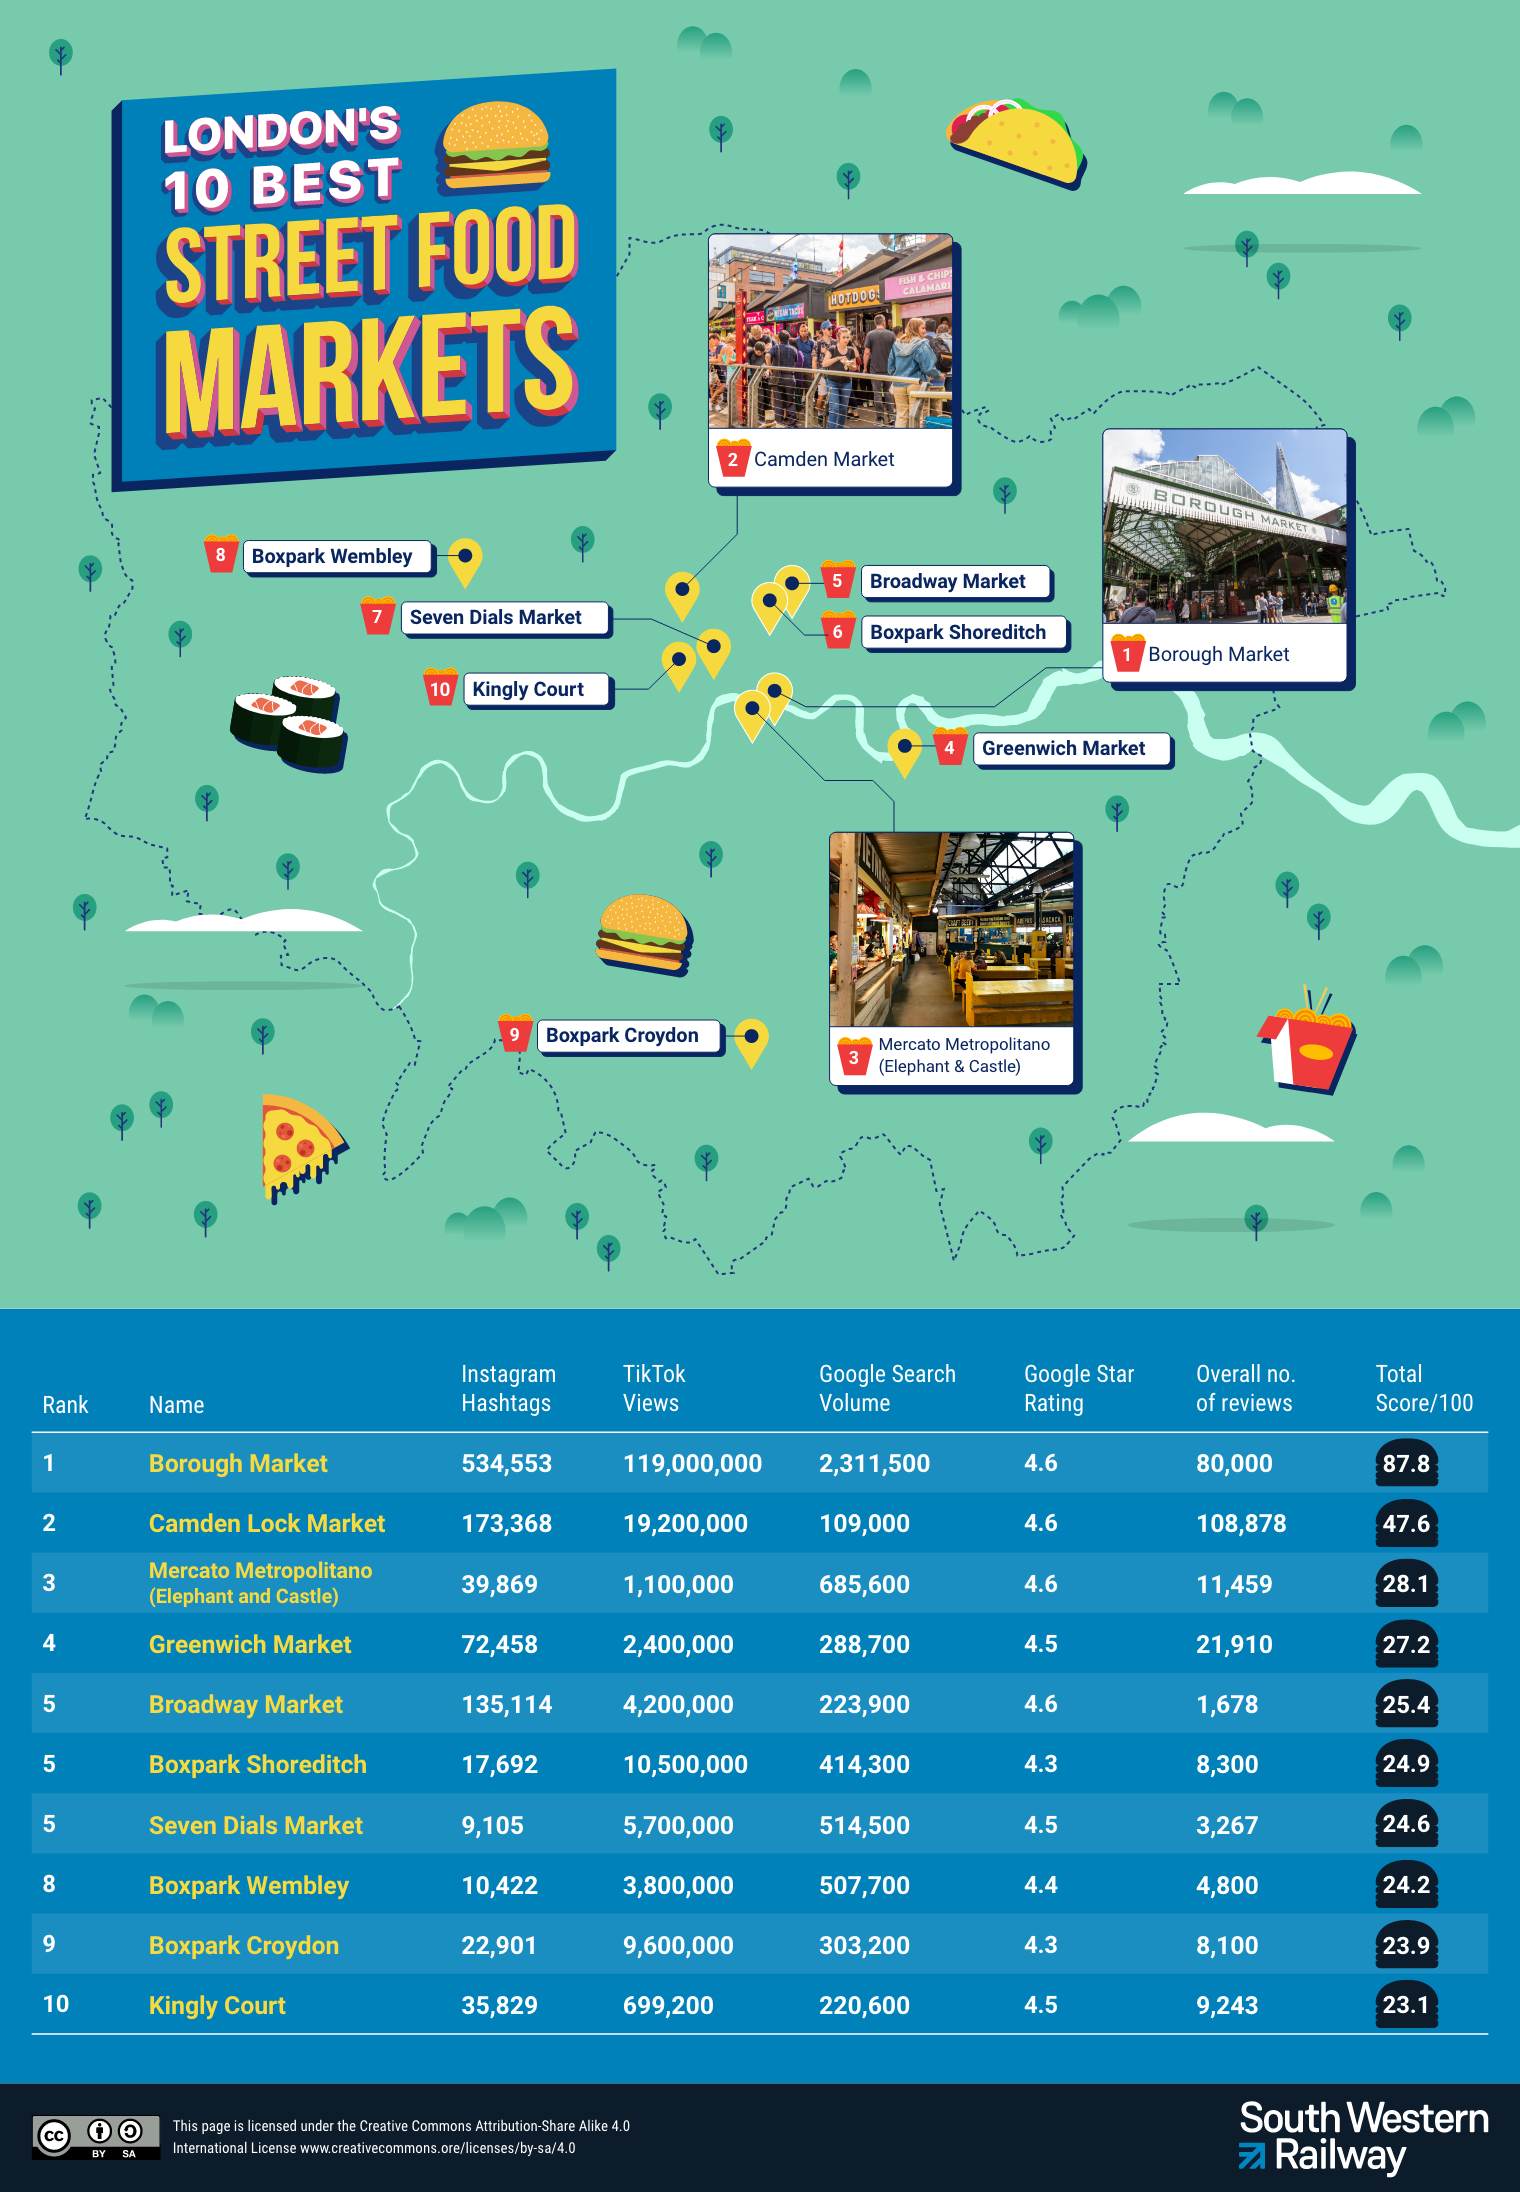 Map and list of London's 10 best streetfood markets